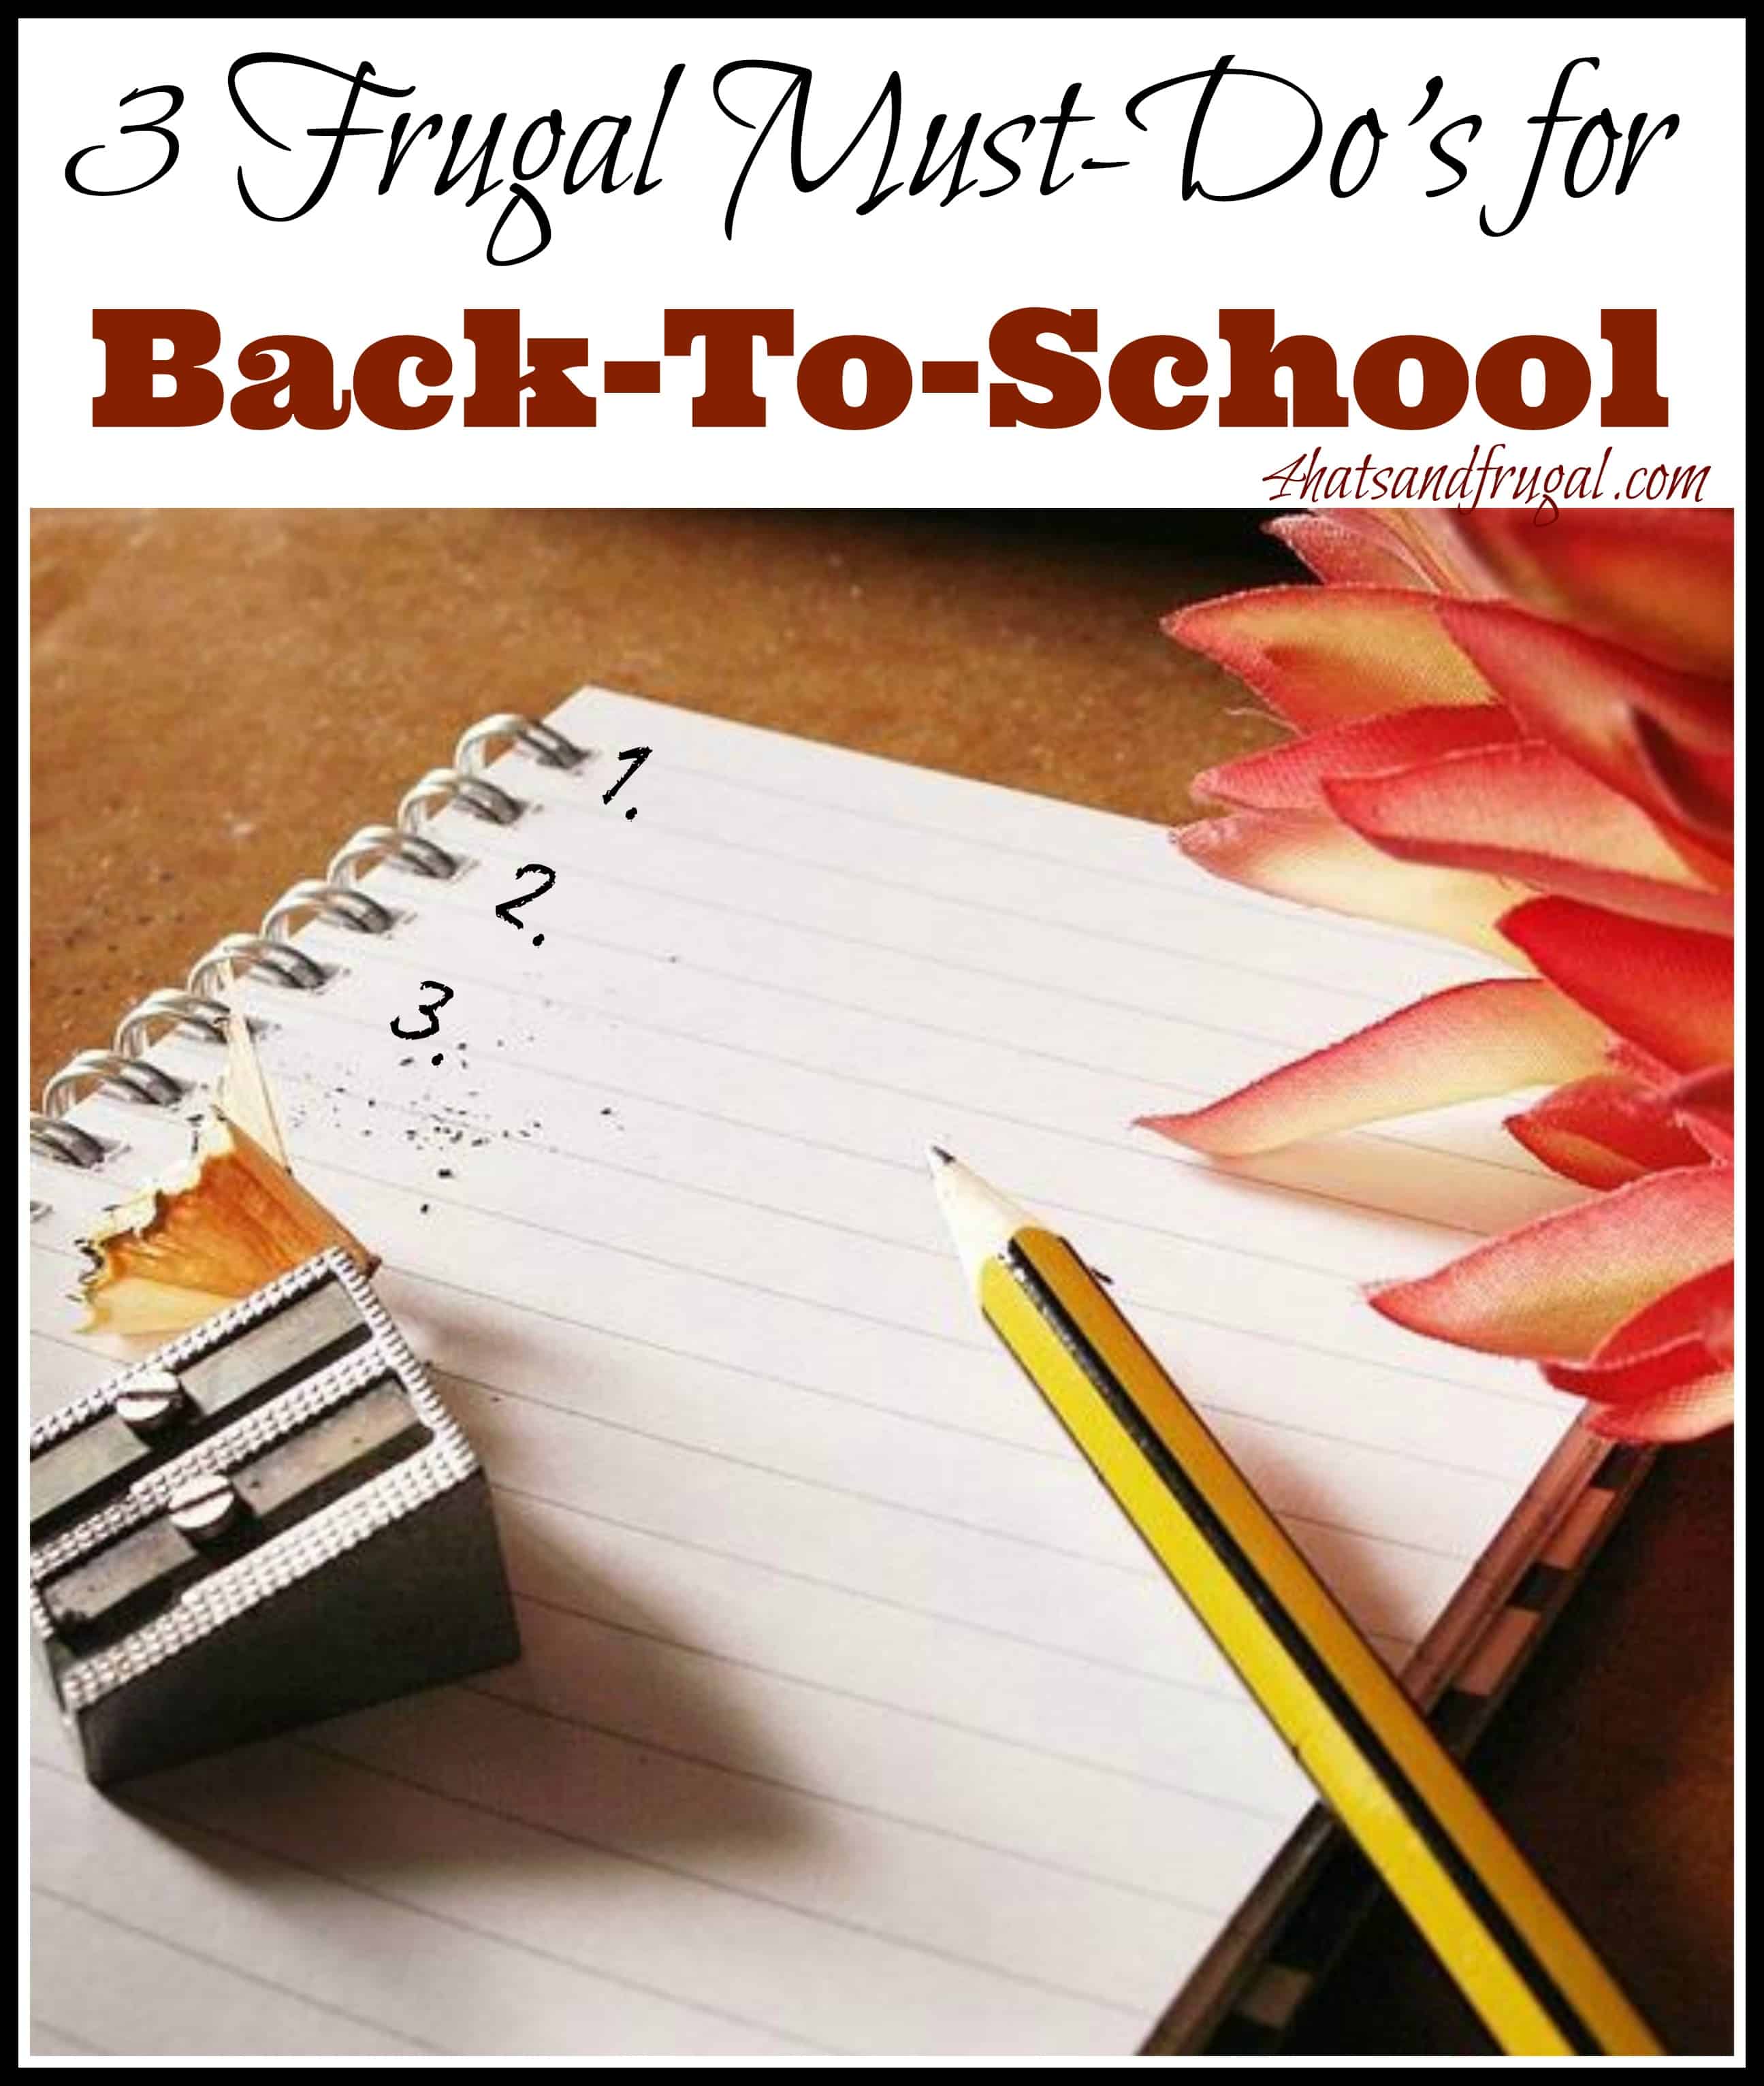 Back-to-school is one of the best times to re-evaluate your home finances. Here are 3 simple tips to get your on track for Fall.